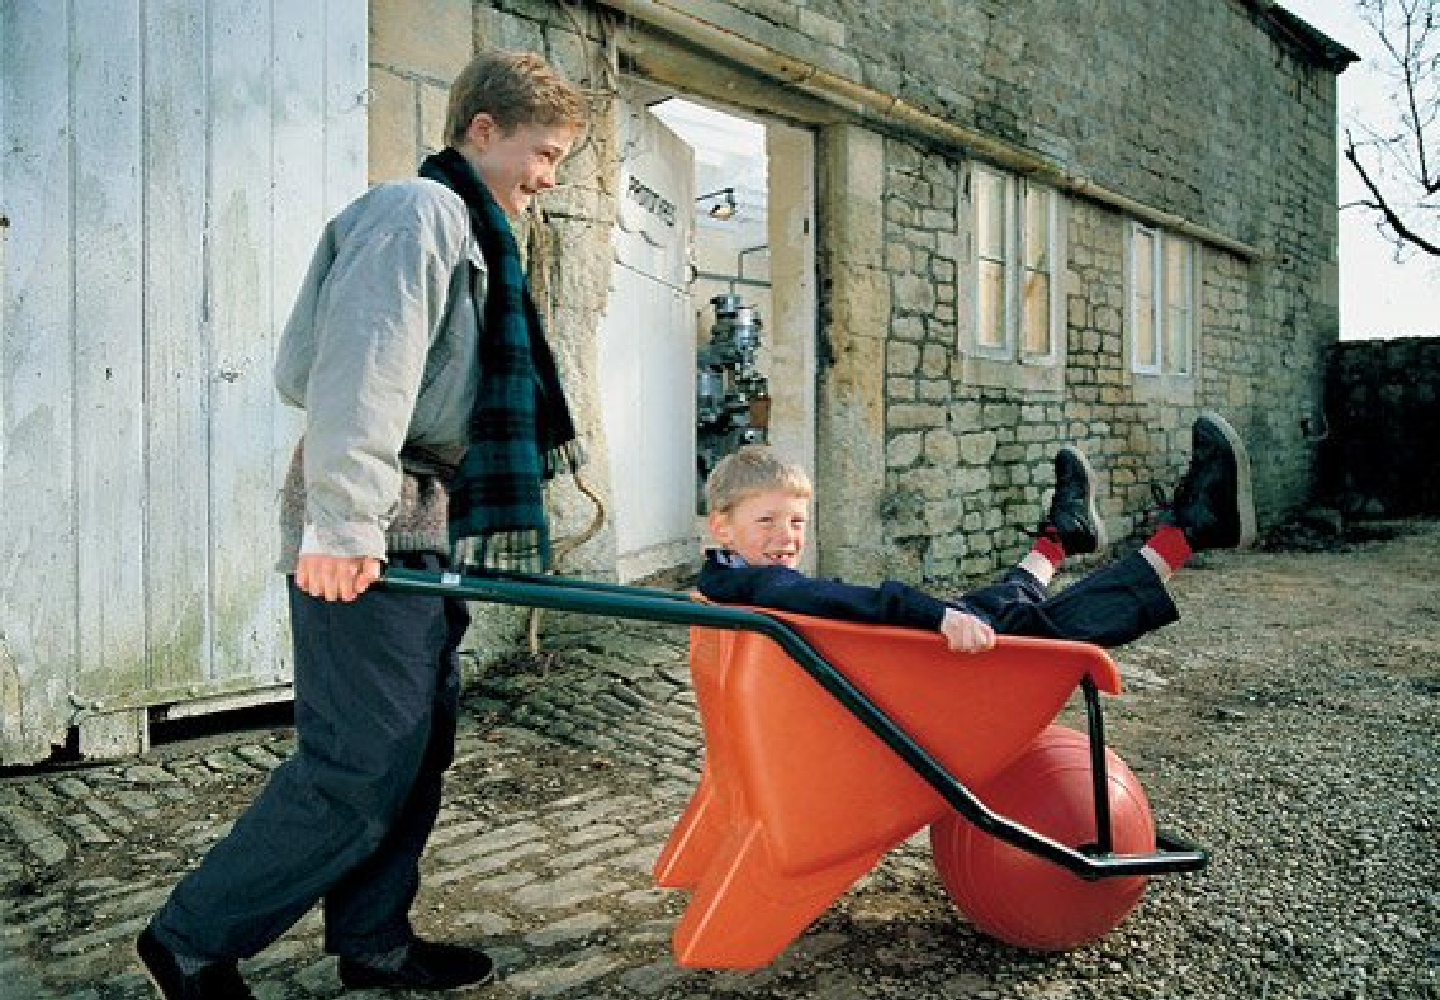 nconventional plastic barrow – with a ball rather than a wheel 